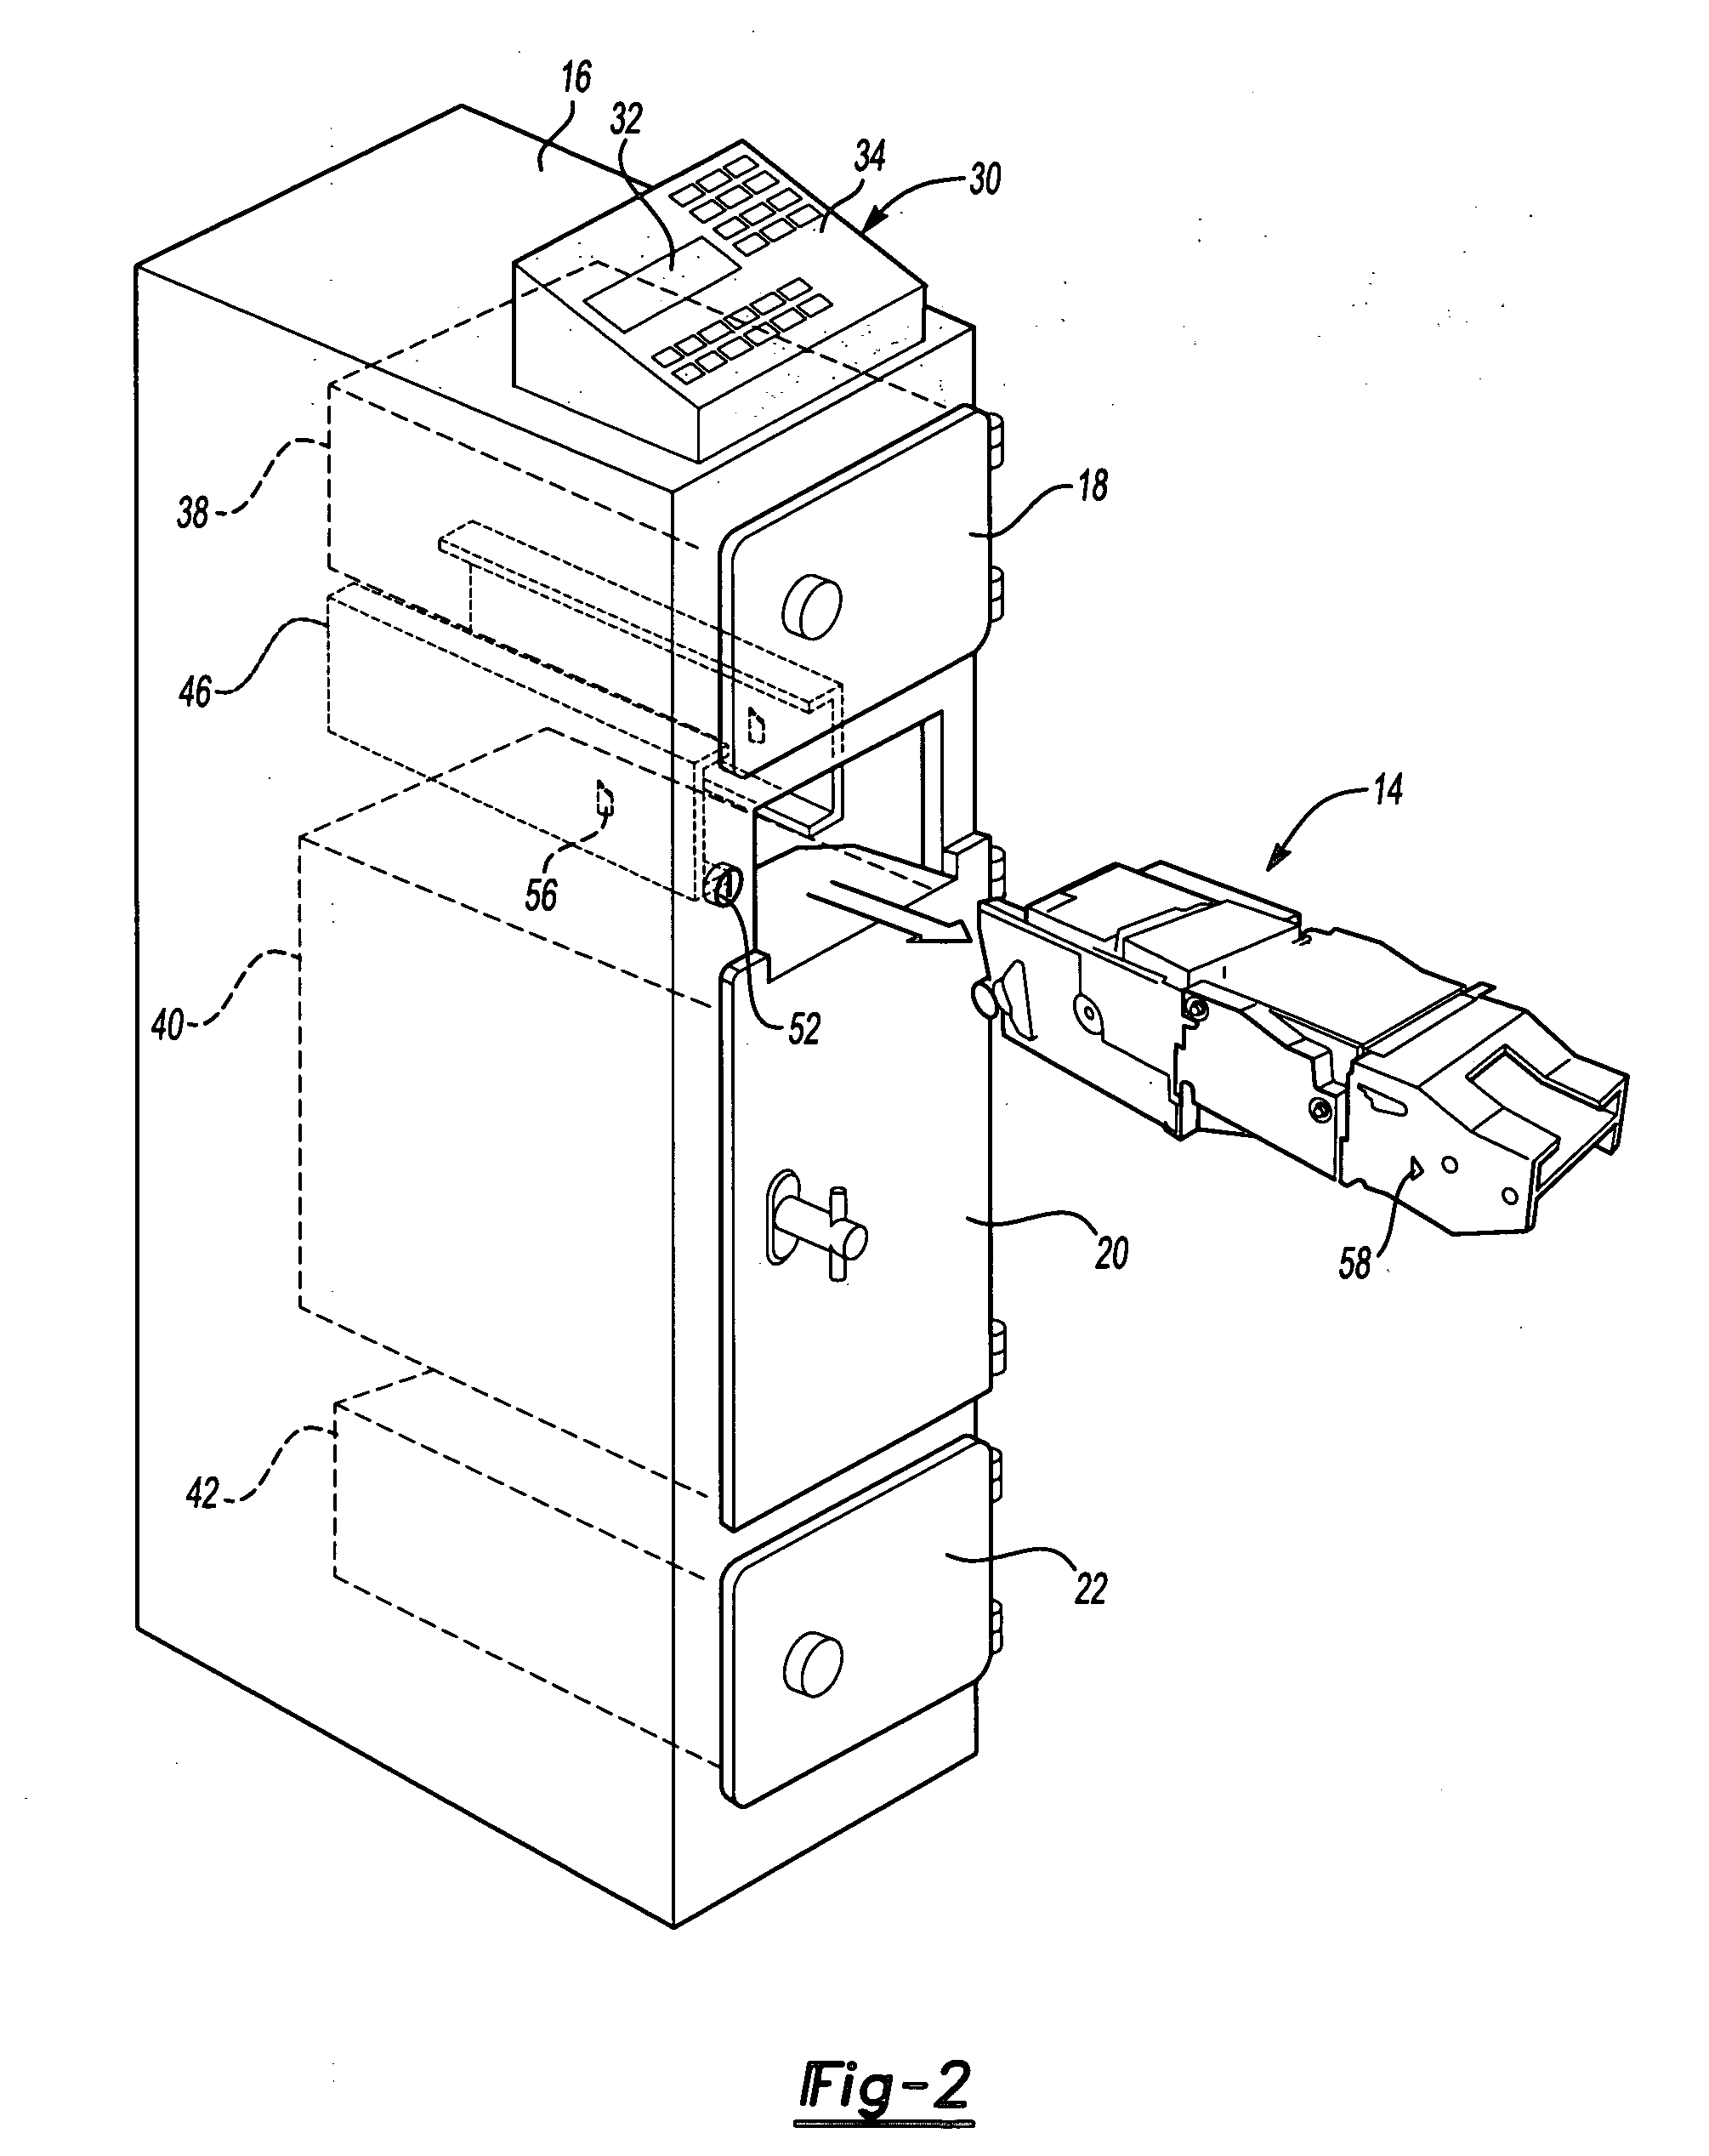 Apparatus having a bill validator and a method of servicing the apparatus